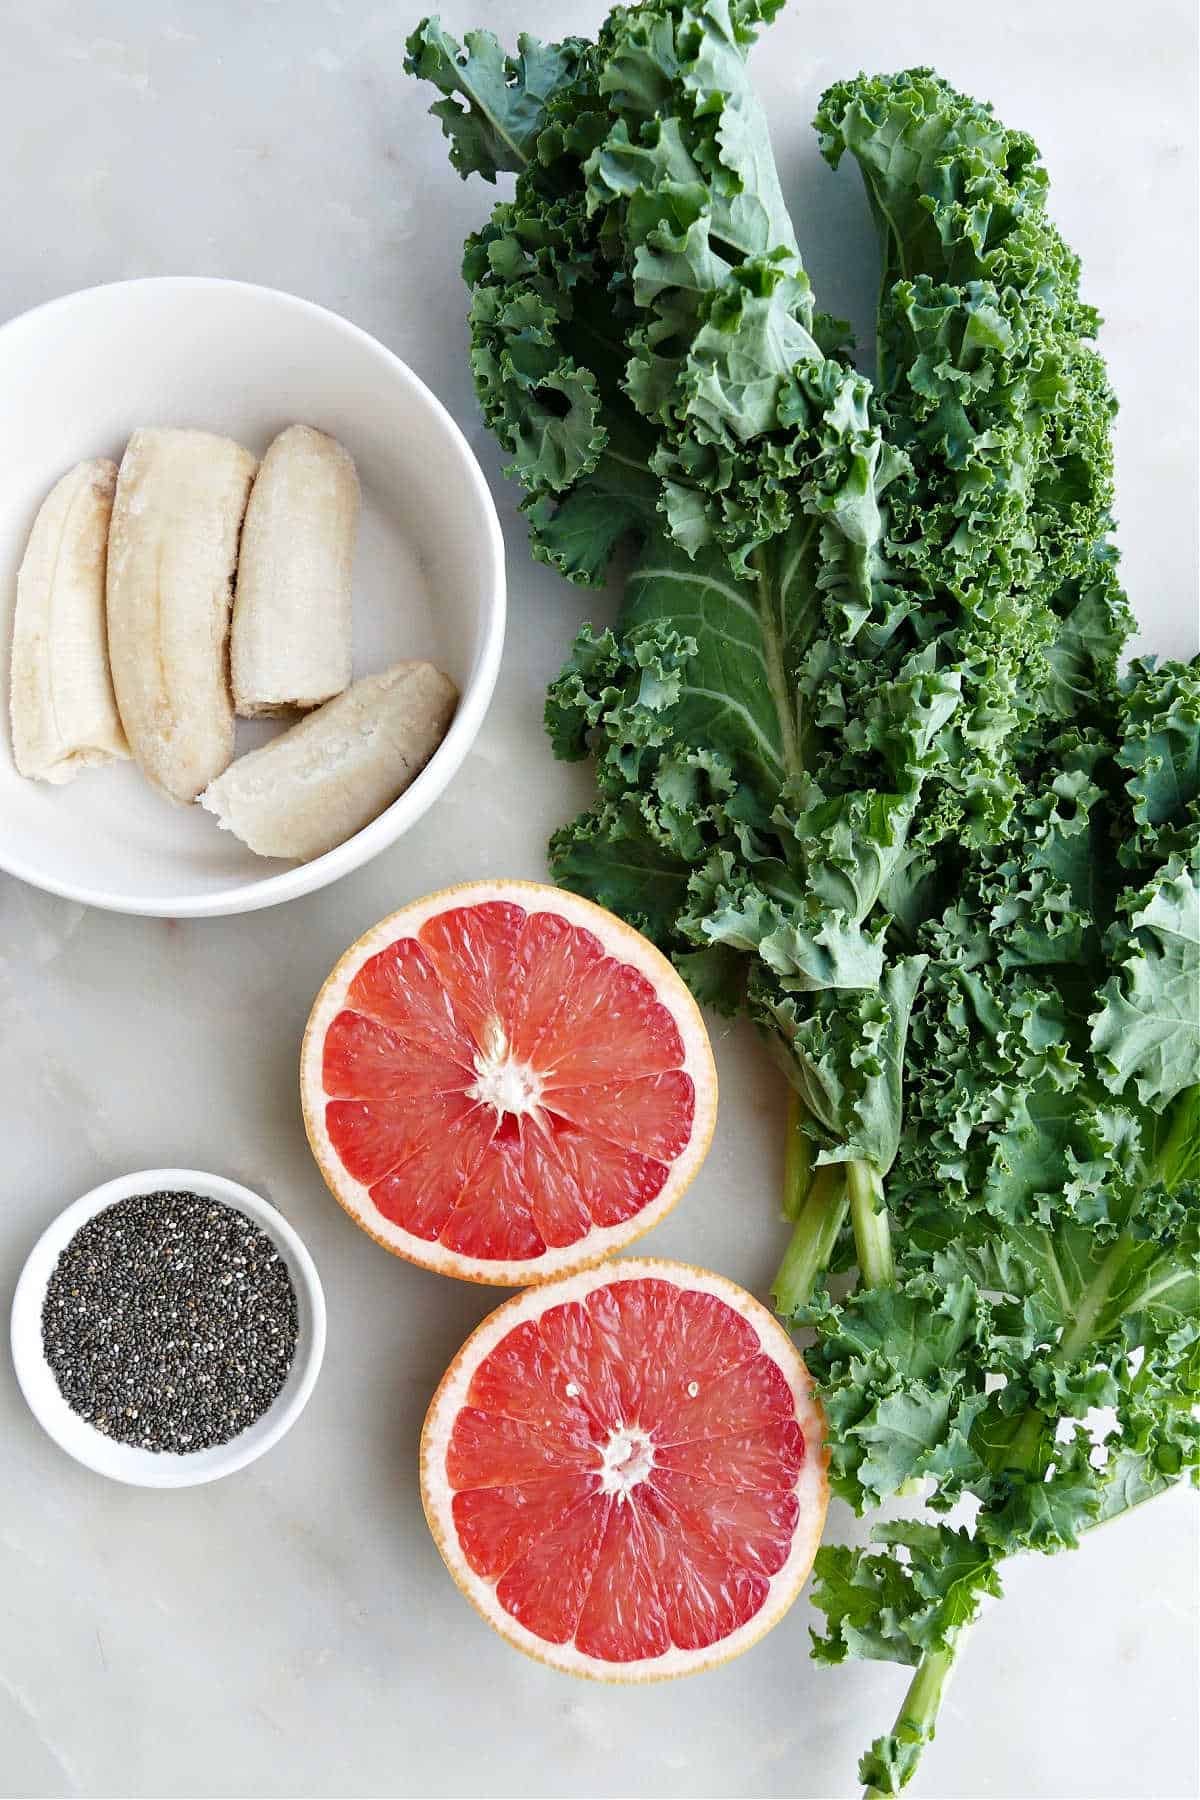 banana, kale leaves, grapefruit, and chia seeds on a counter